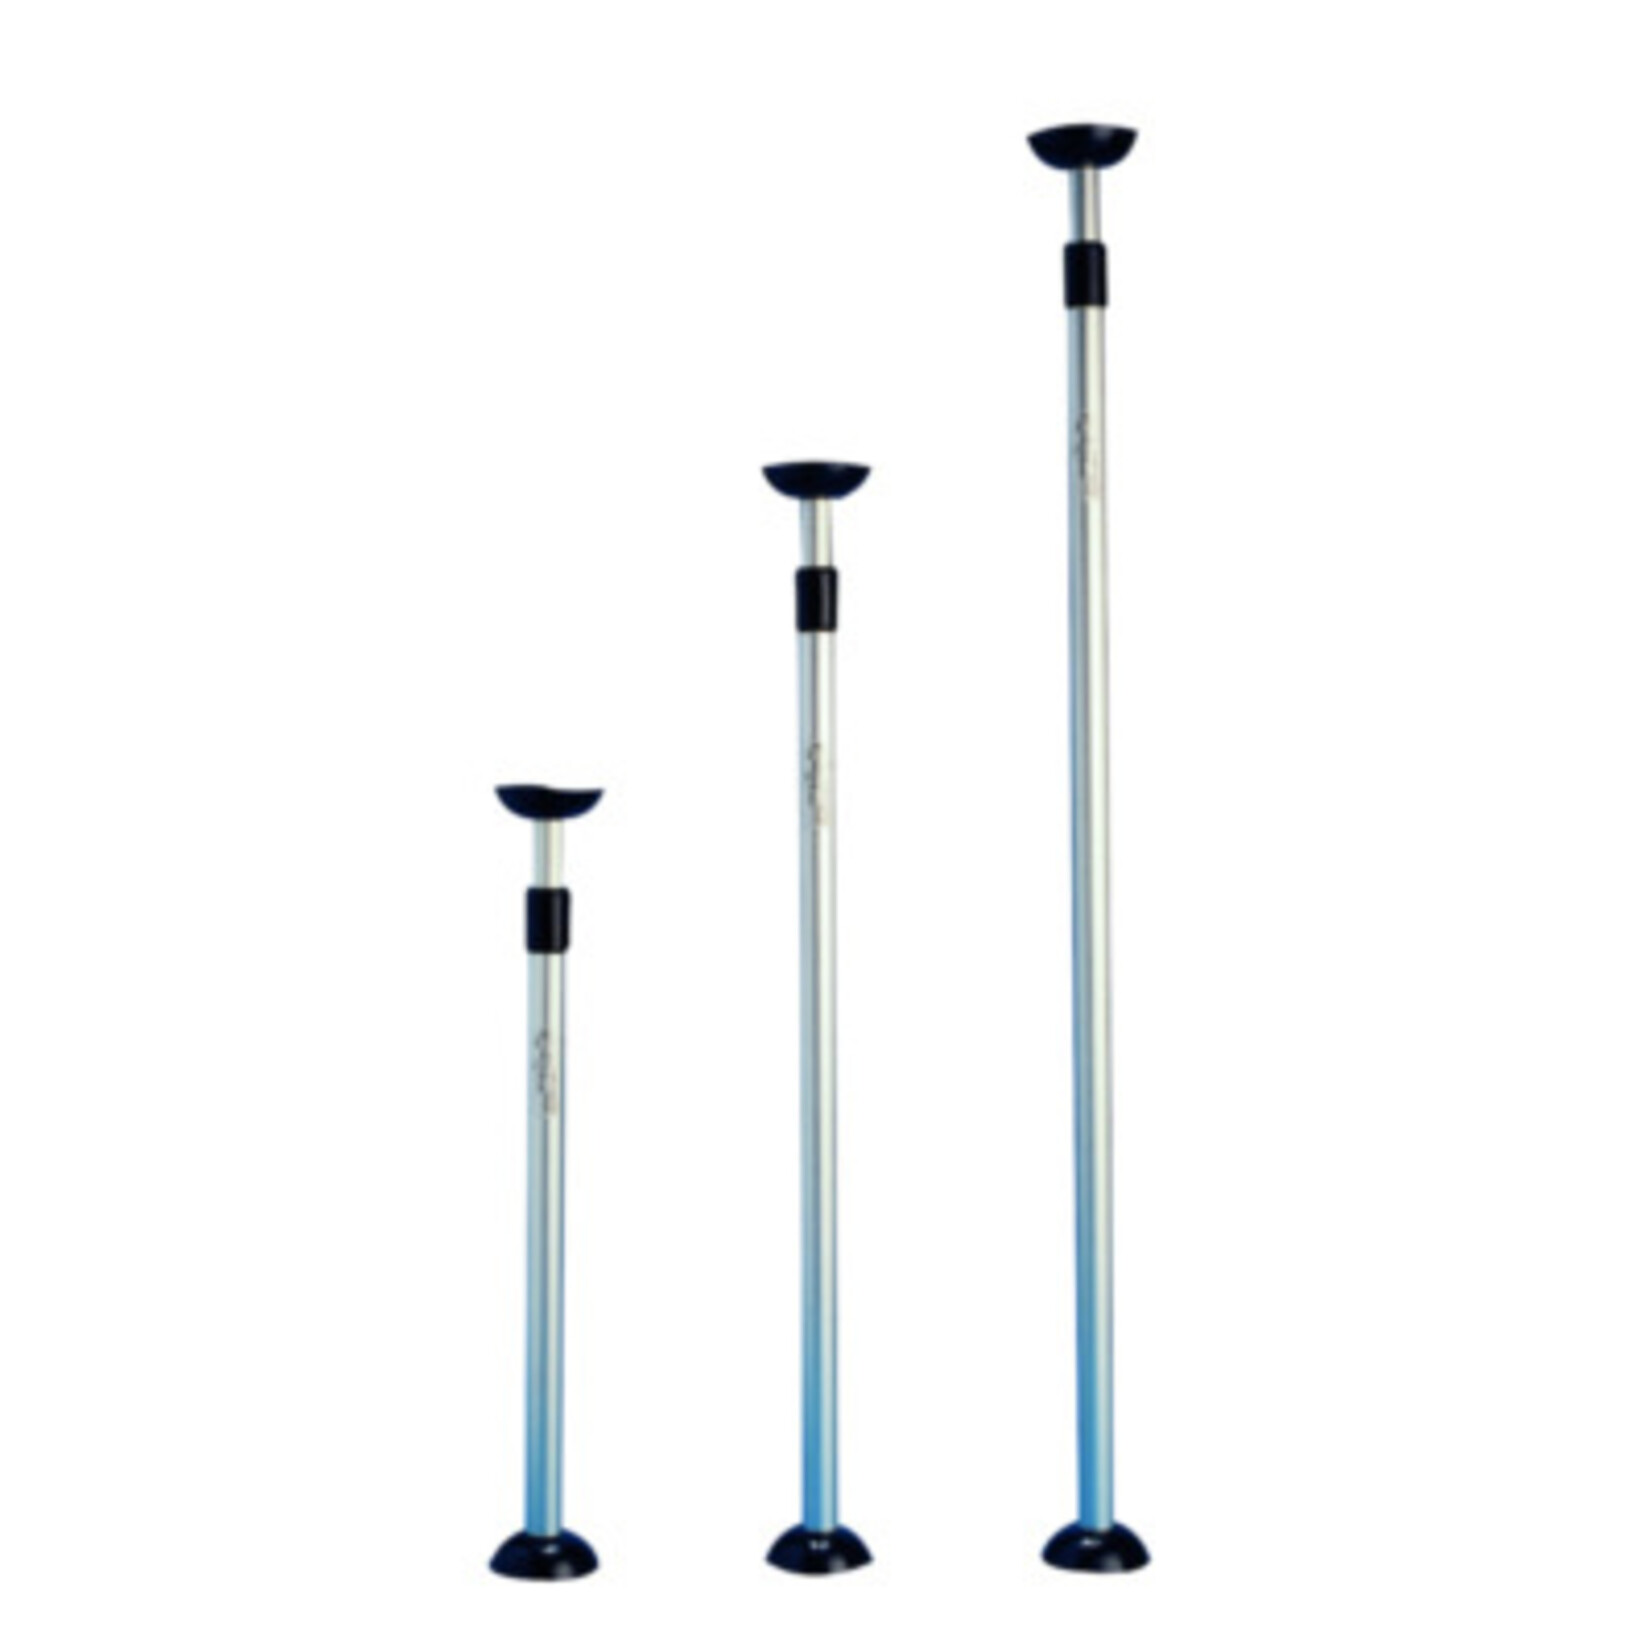 Plastimo Support pole for awning 860/1510mm